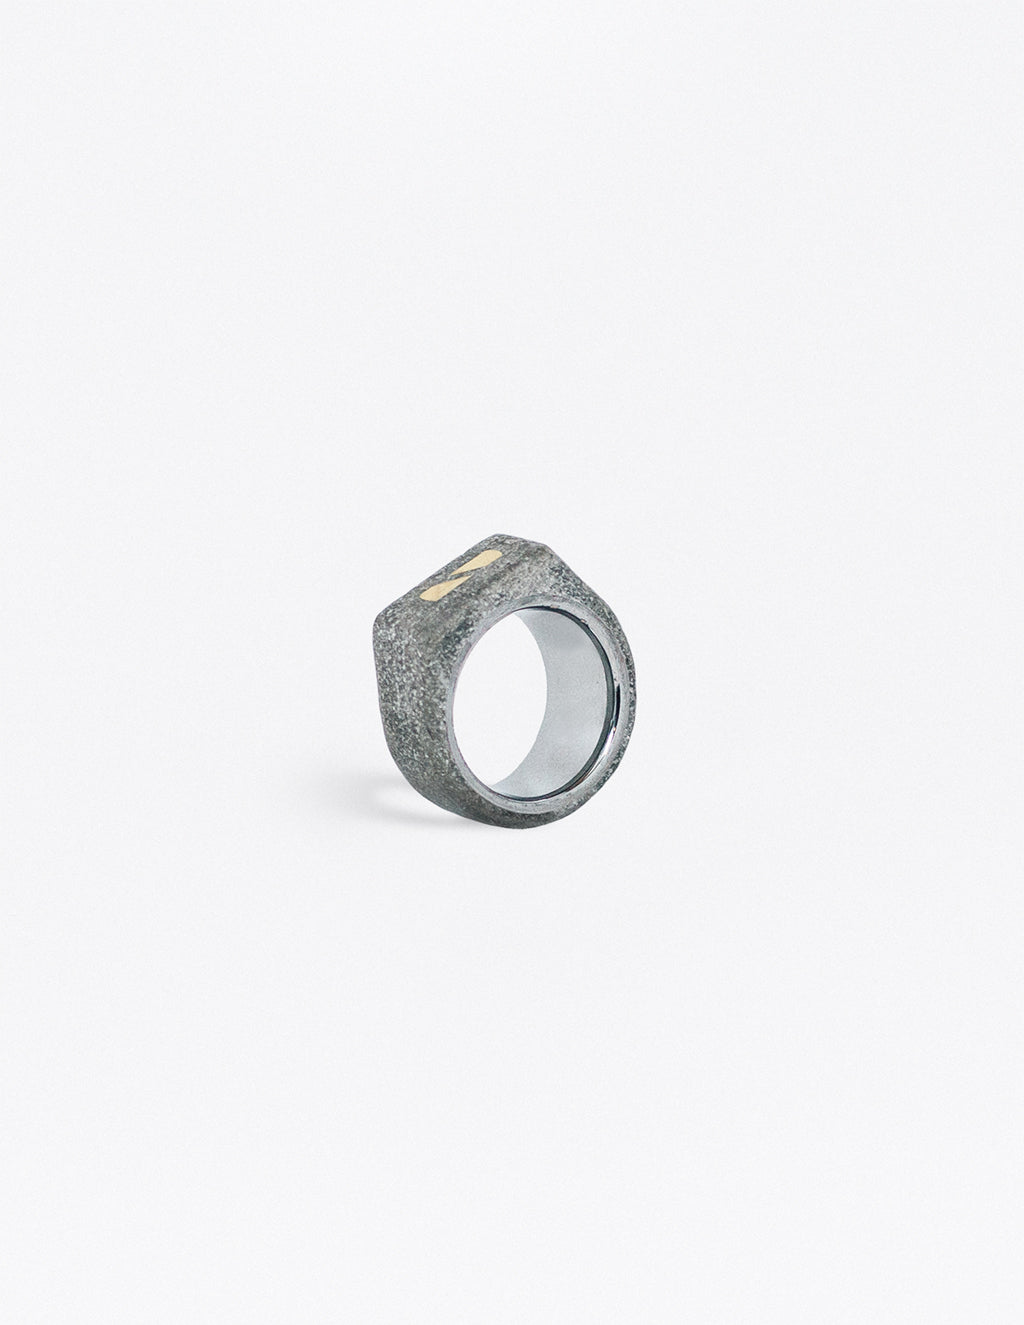 Yomo Studio 6mm split brass ring. Materials include: concrete, brass, and tungsten ring.